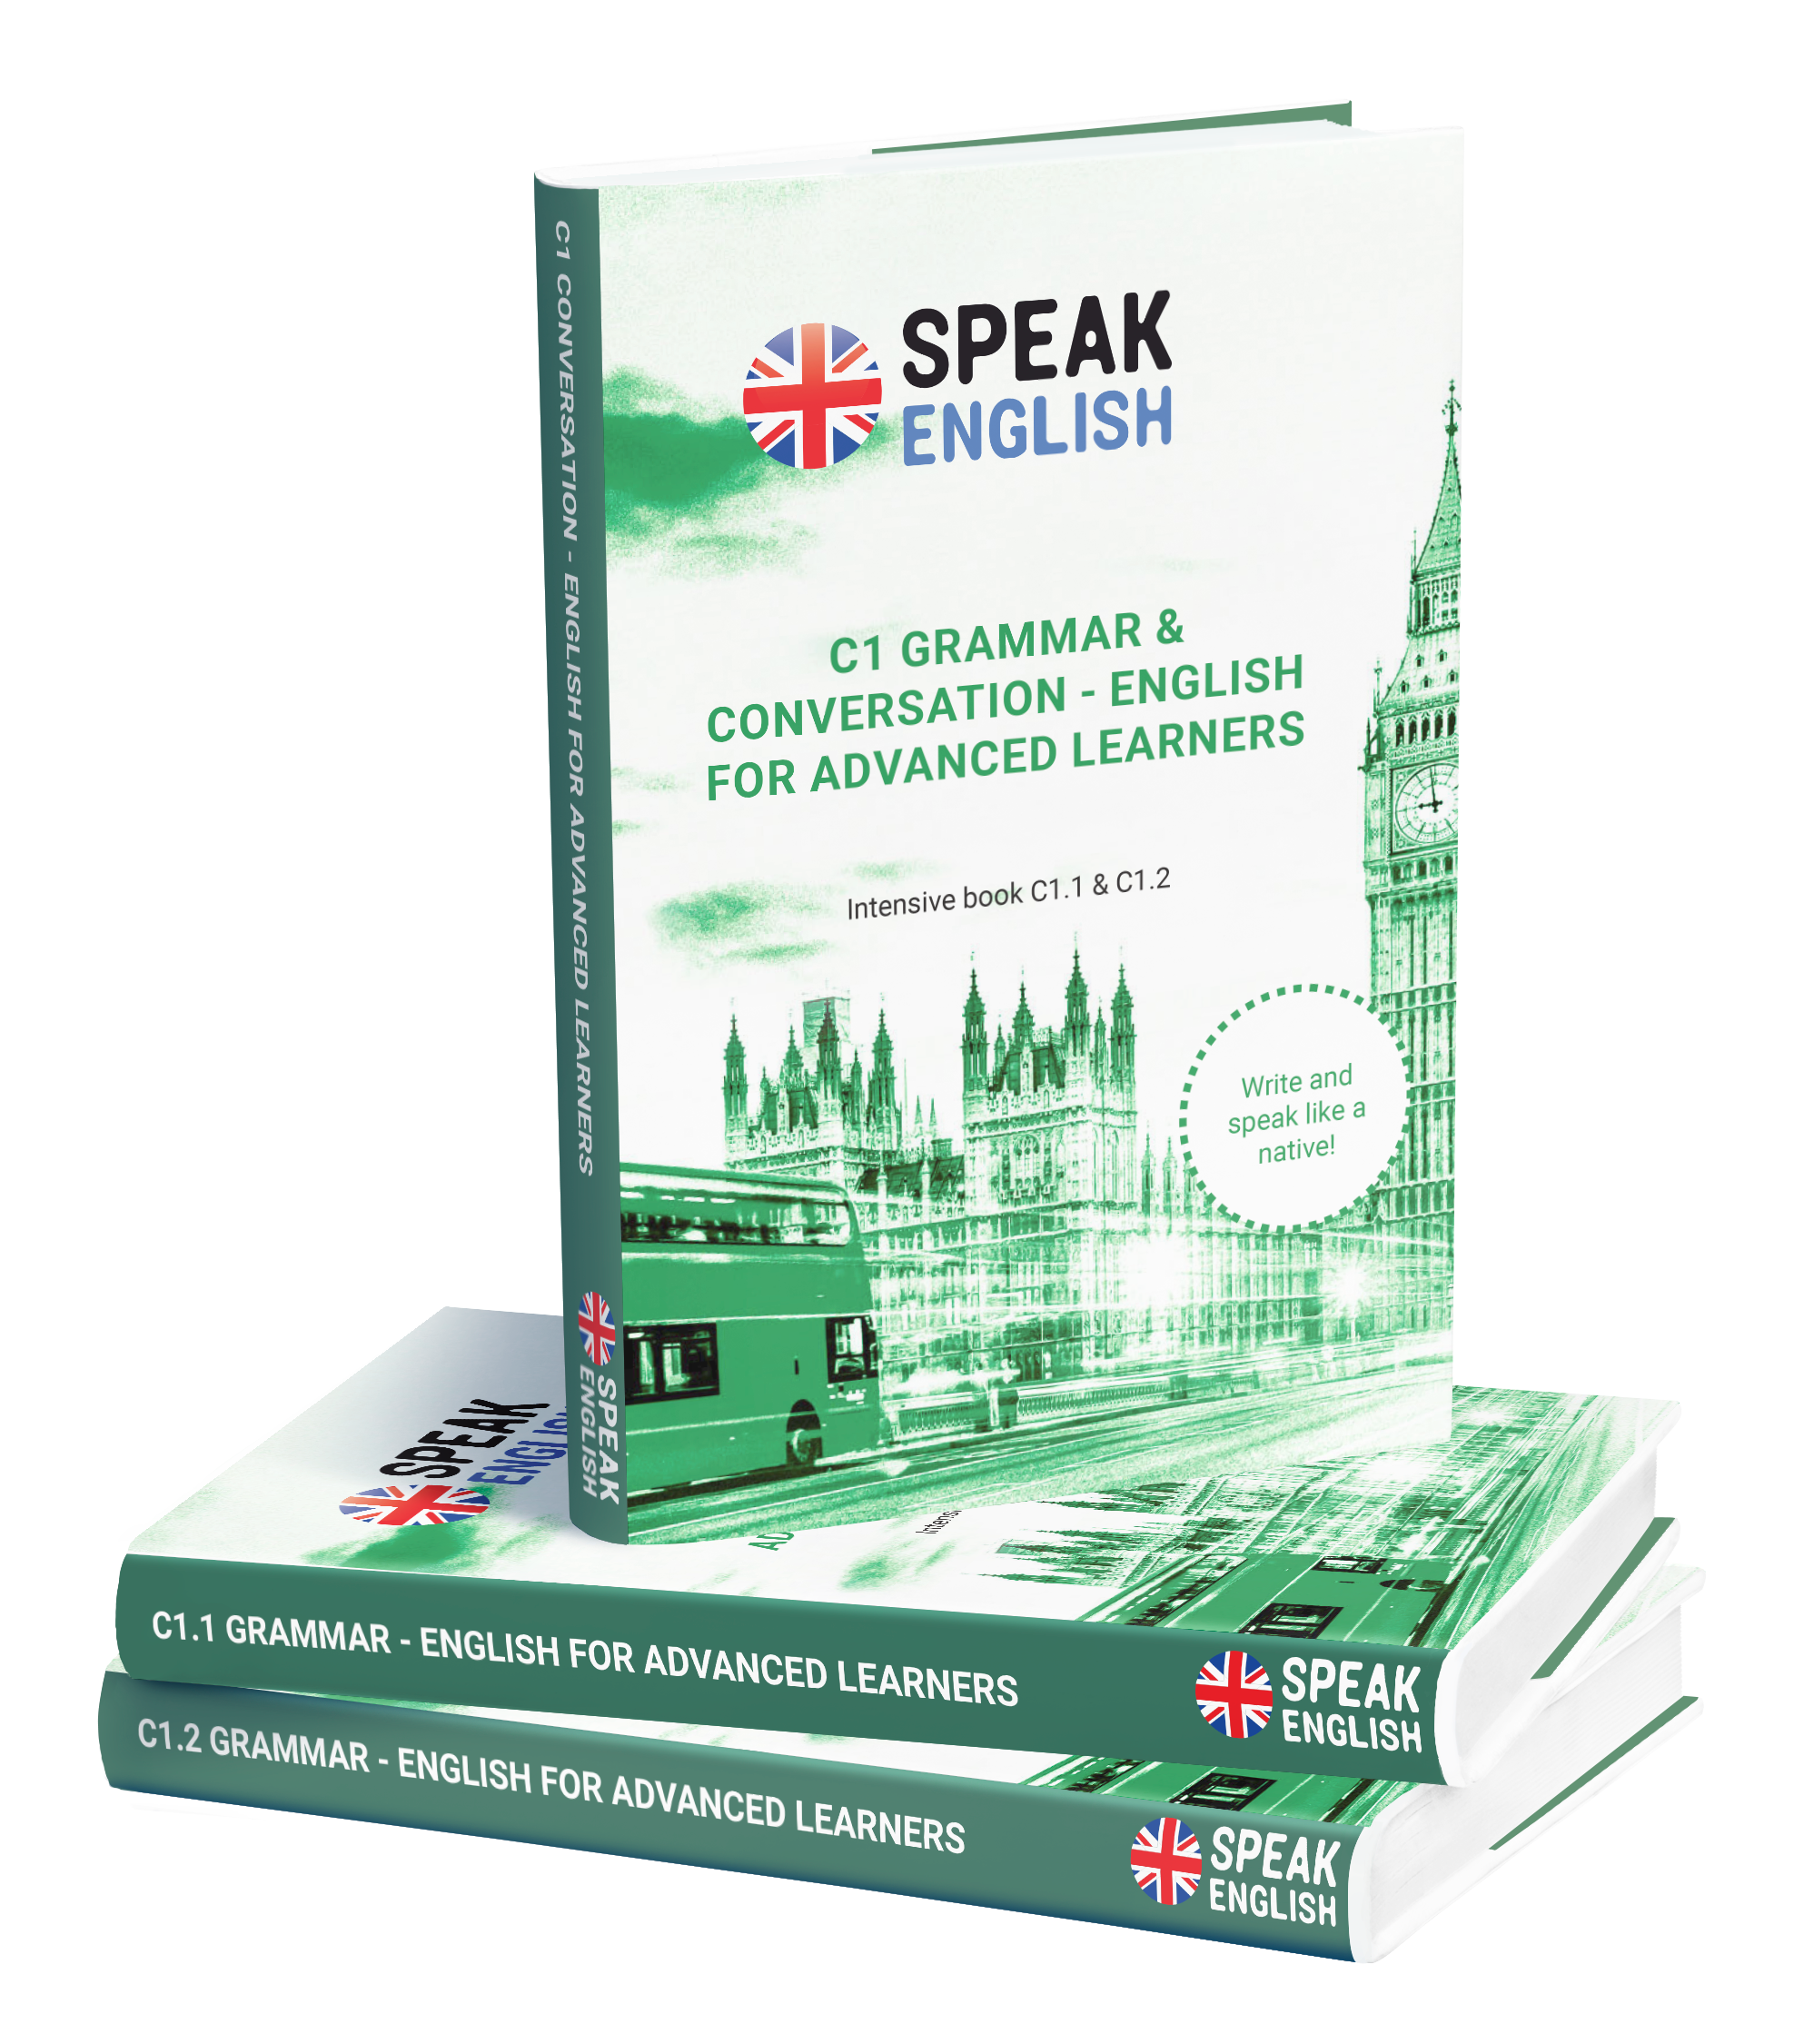 C1 level English books and intensive course 